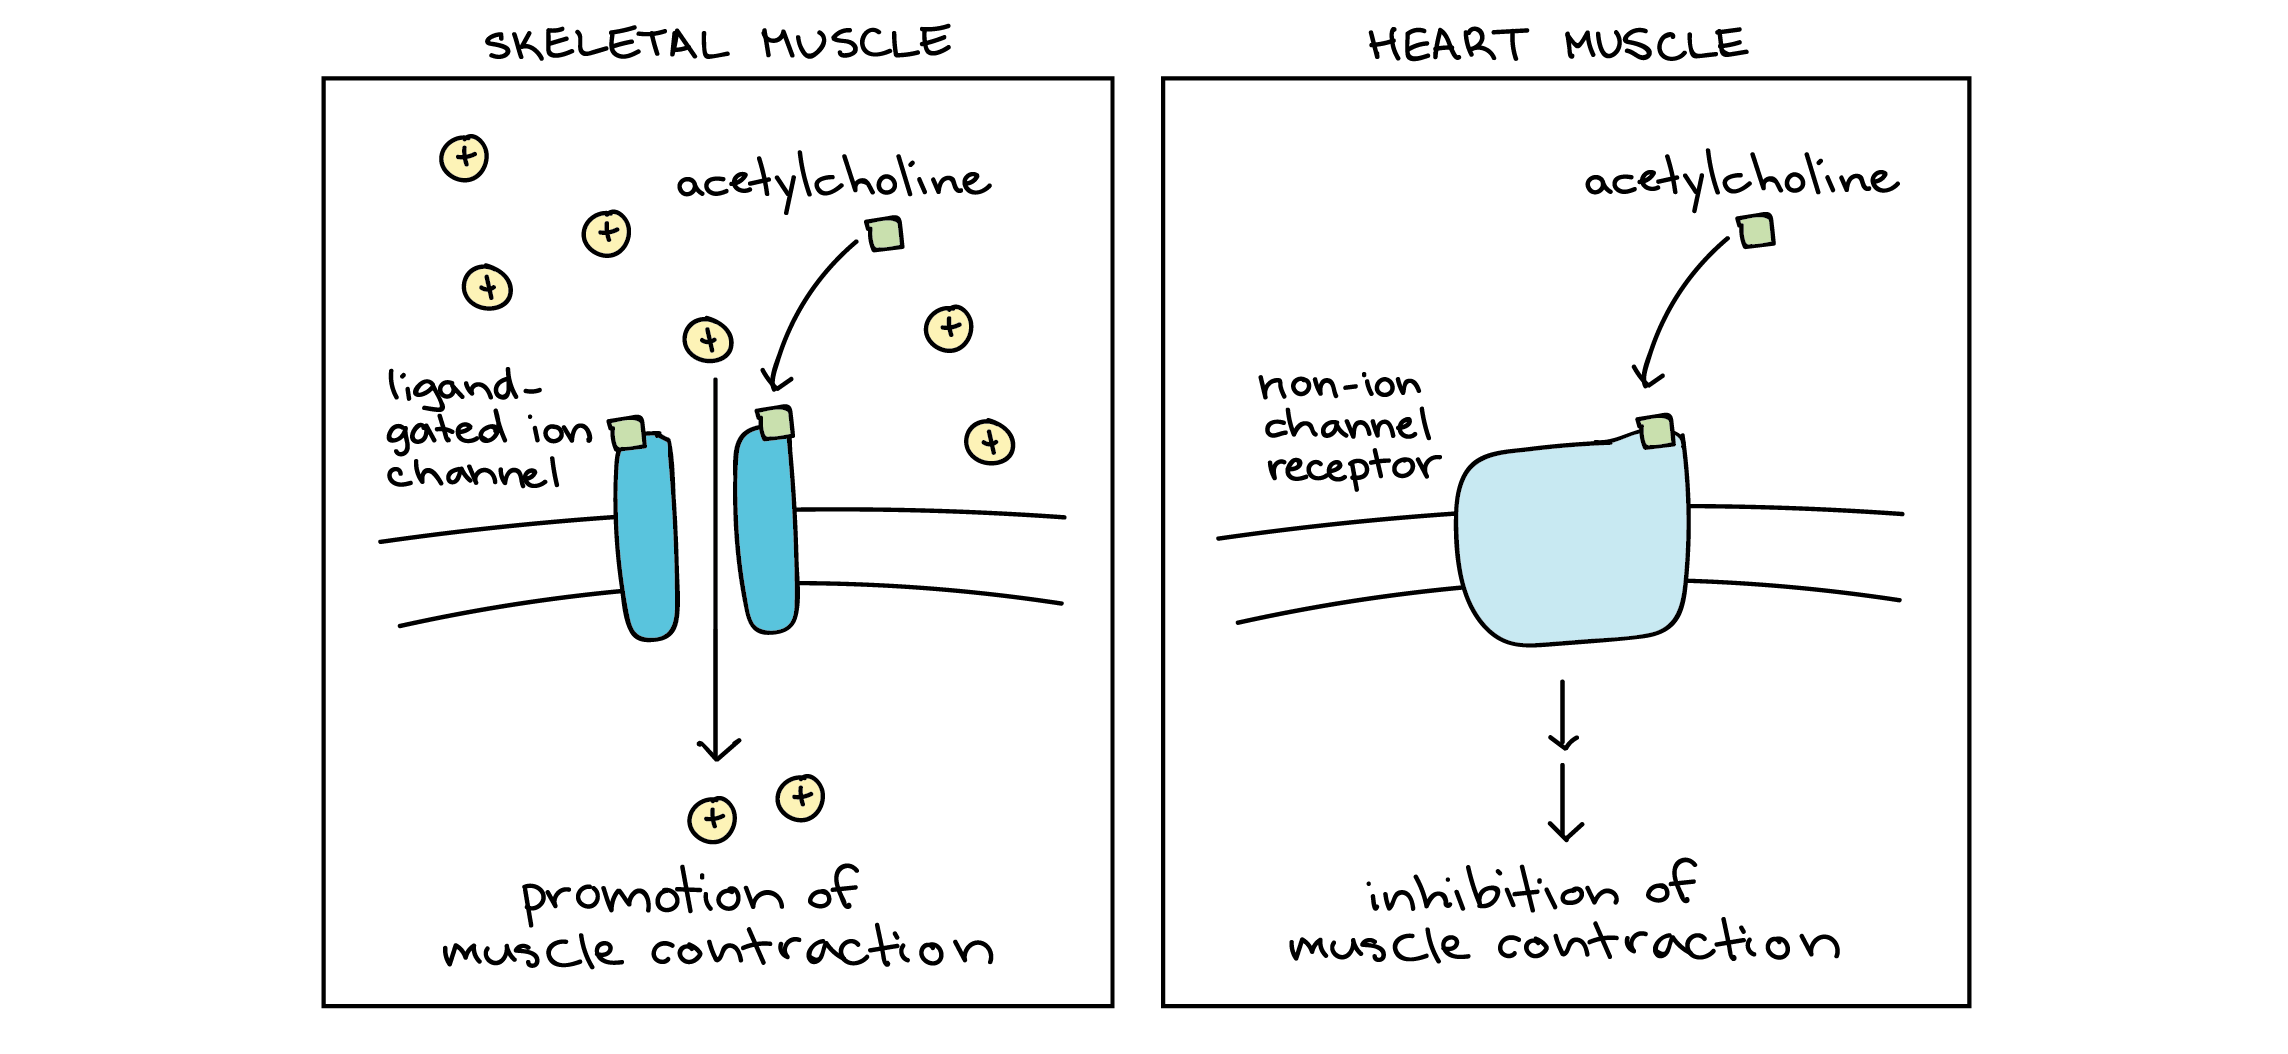 Cell type specificity in response to acetylcholine.

Left panel: skeletal muscle cell. The acetylcholine molecule binds to a ligand-gated ion channel, causing it to open and allowing positively charged ions to enter the cell. This event promotes muscle contraction.

Right panel: cardiac muscle cell. The acetylcholine molecule binds to a G protein-coupled receptor, triggering a downstream response that leads to inhibition of muscle contraction.